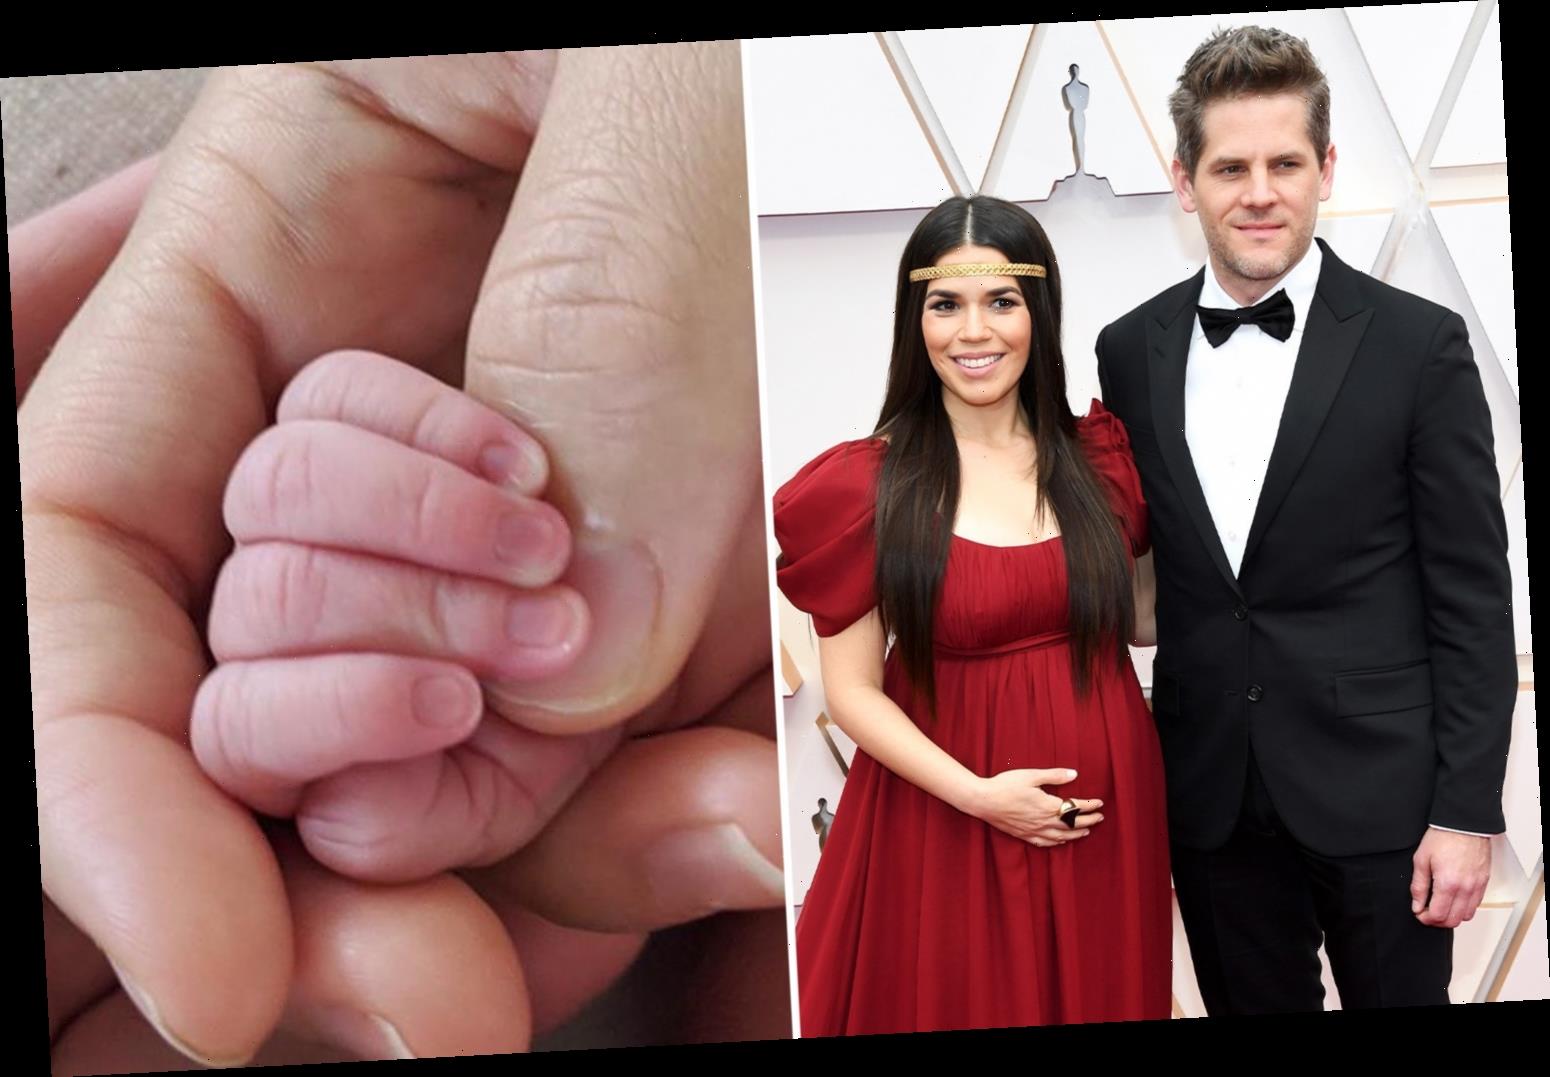 Ugly Betty Star America Ferrera Welcomes Daughter Lucia With Husband Ryan Piers Williams